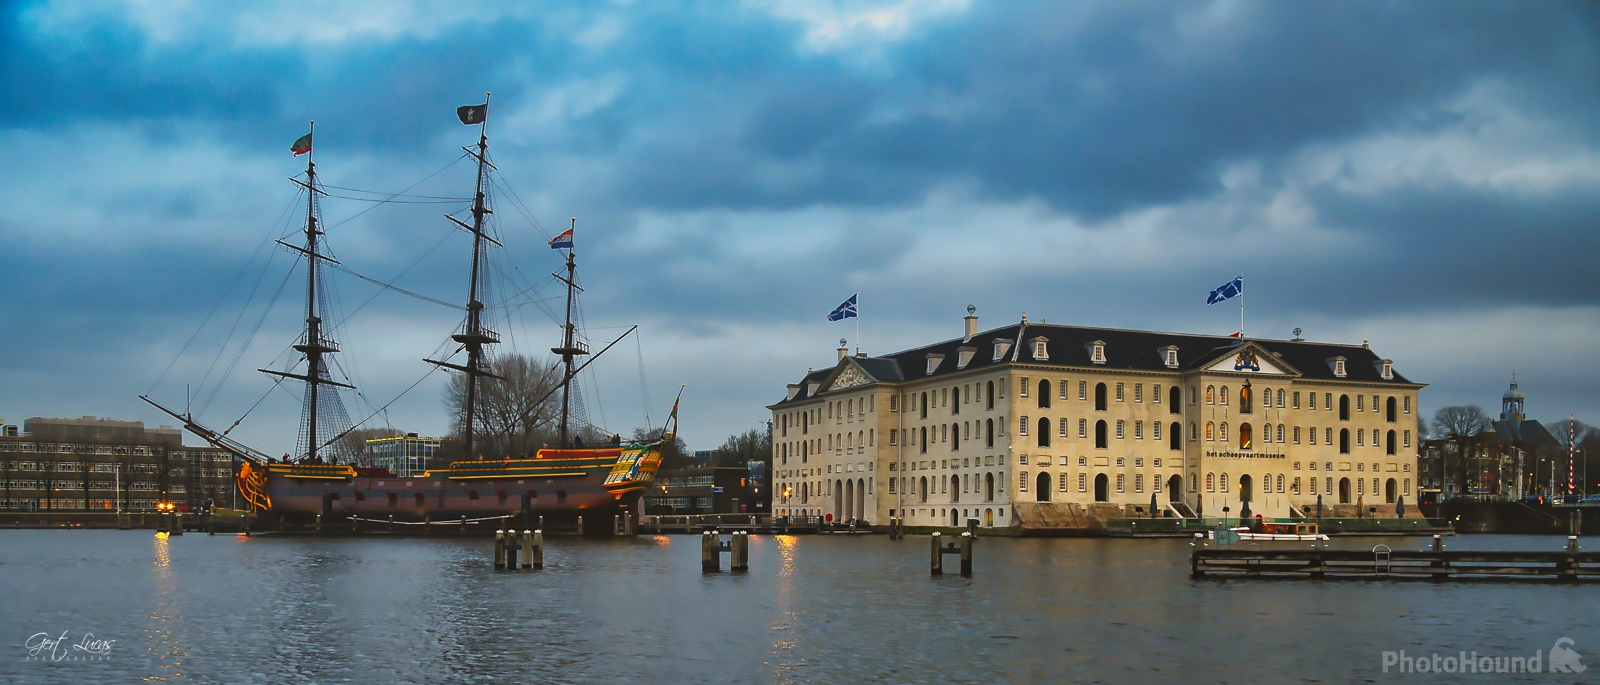 Image of View of the Maritime Museum & The Amsterdam Replica by Gert Lucas